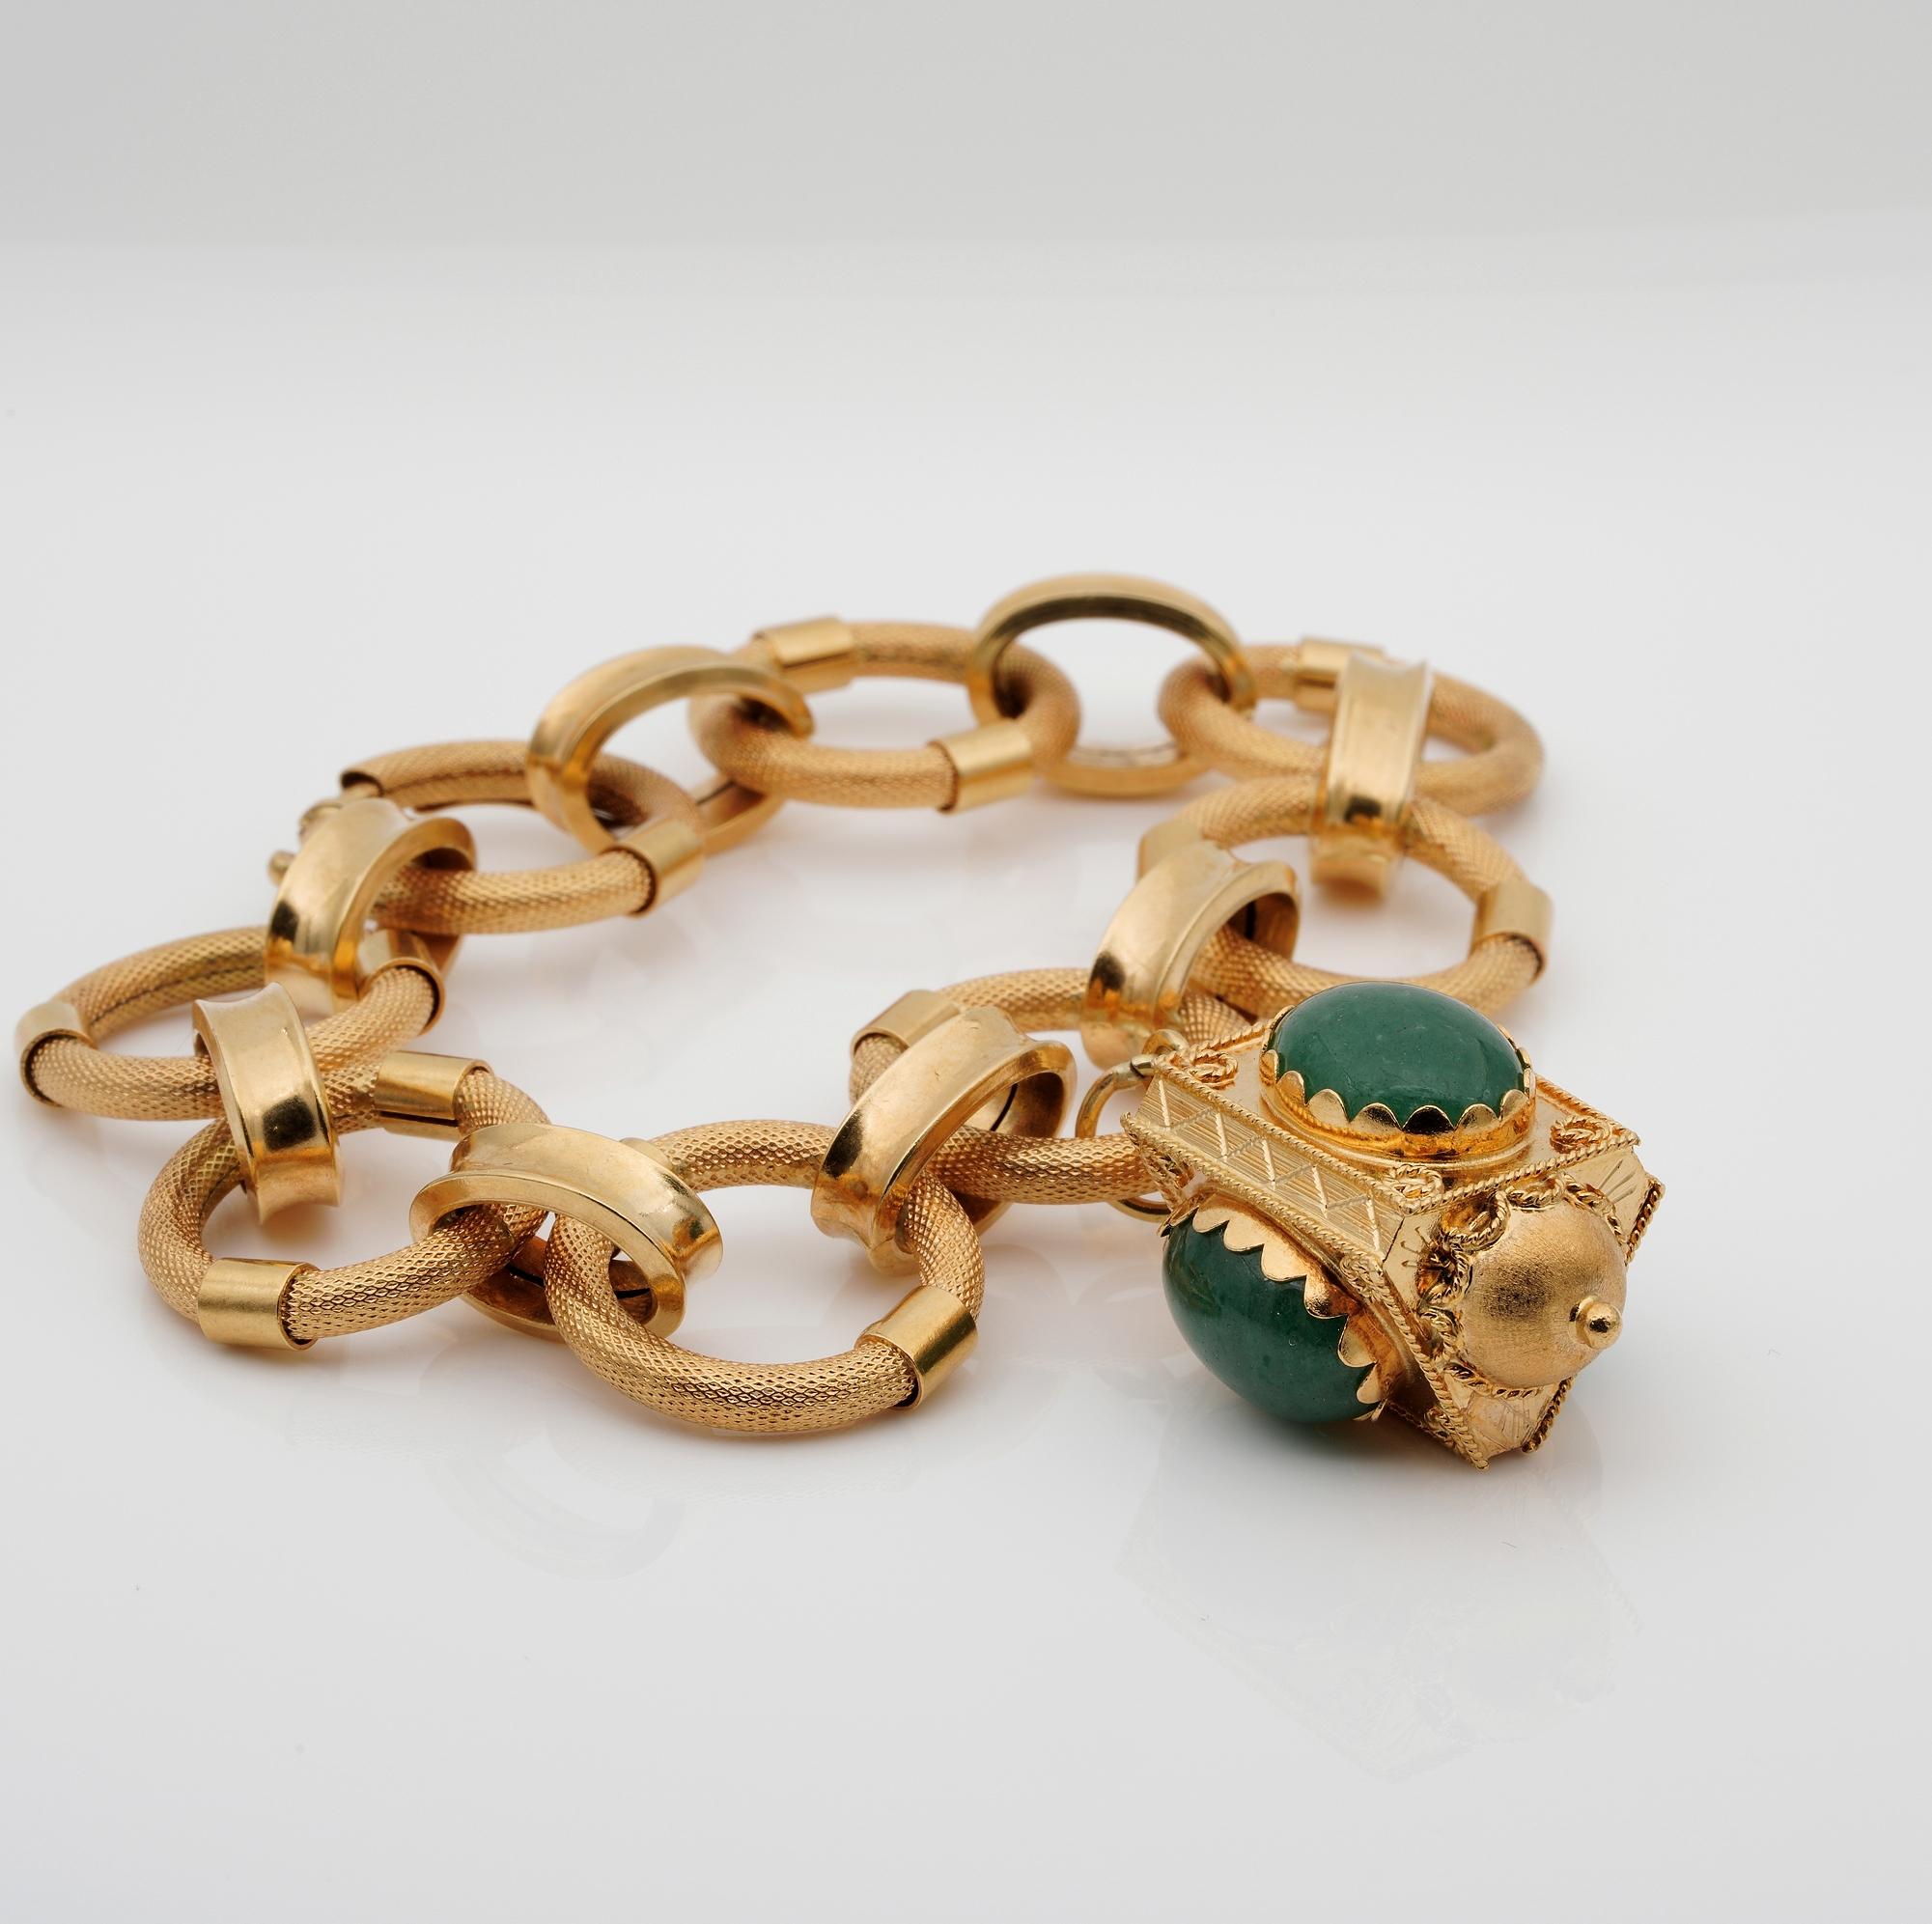 Retro Italian Etruscan Revival Fob Bracelet 18 KT Gold In Good Condition For Sale In Napoli, IT